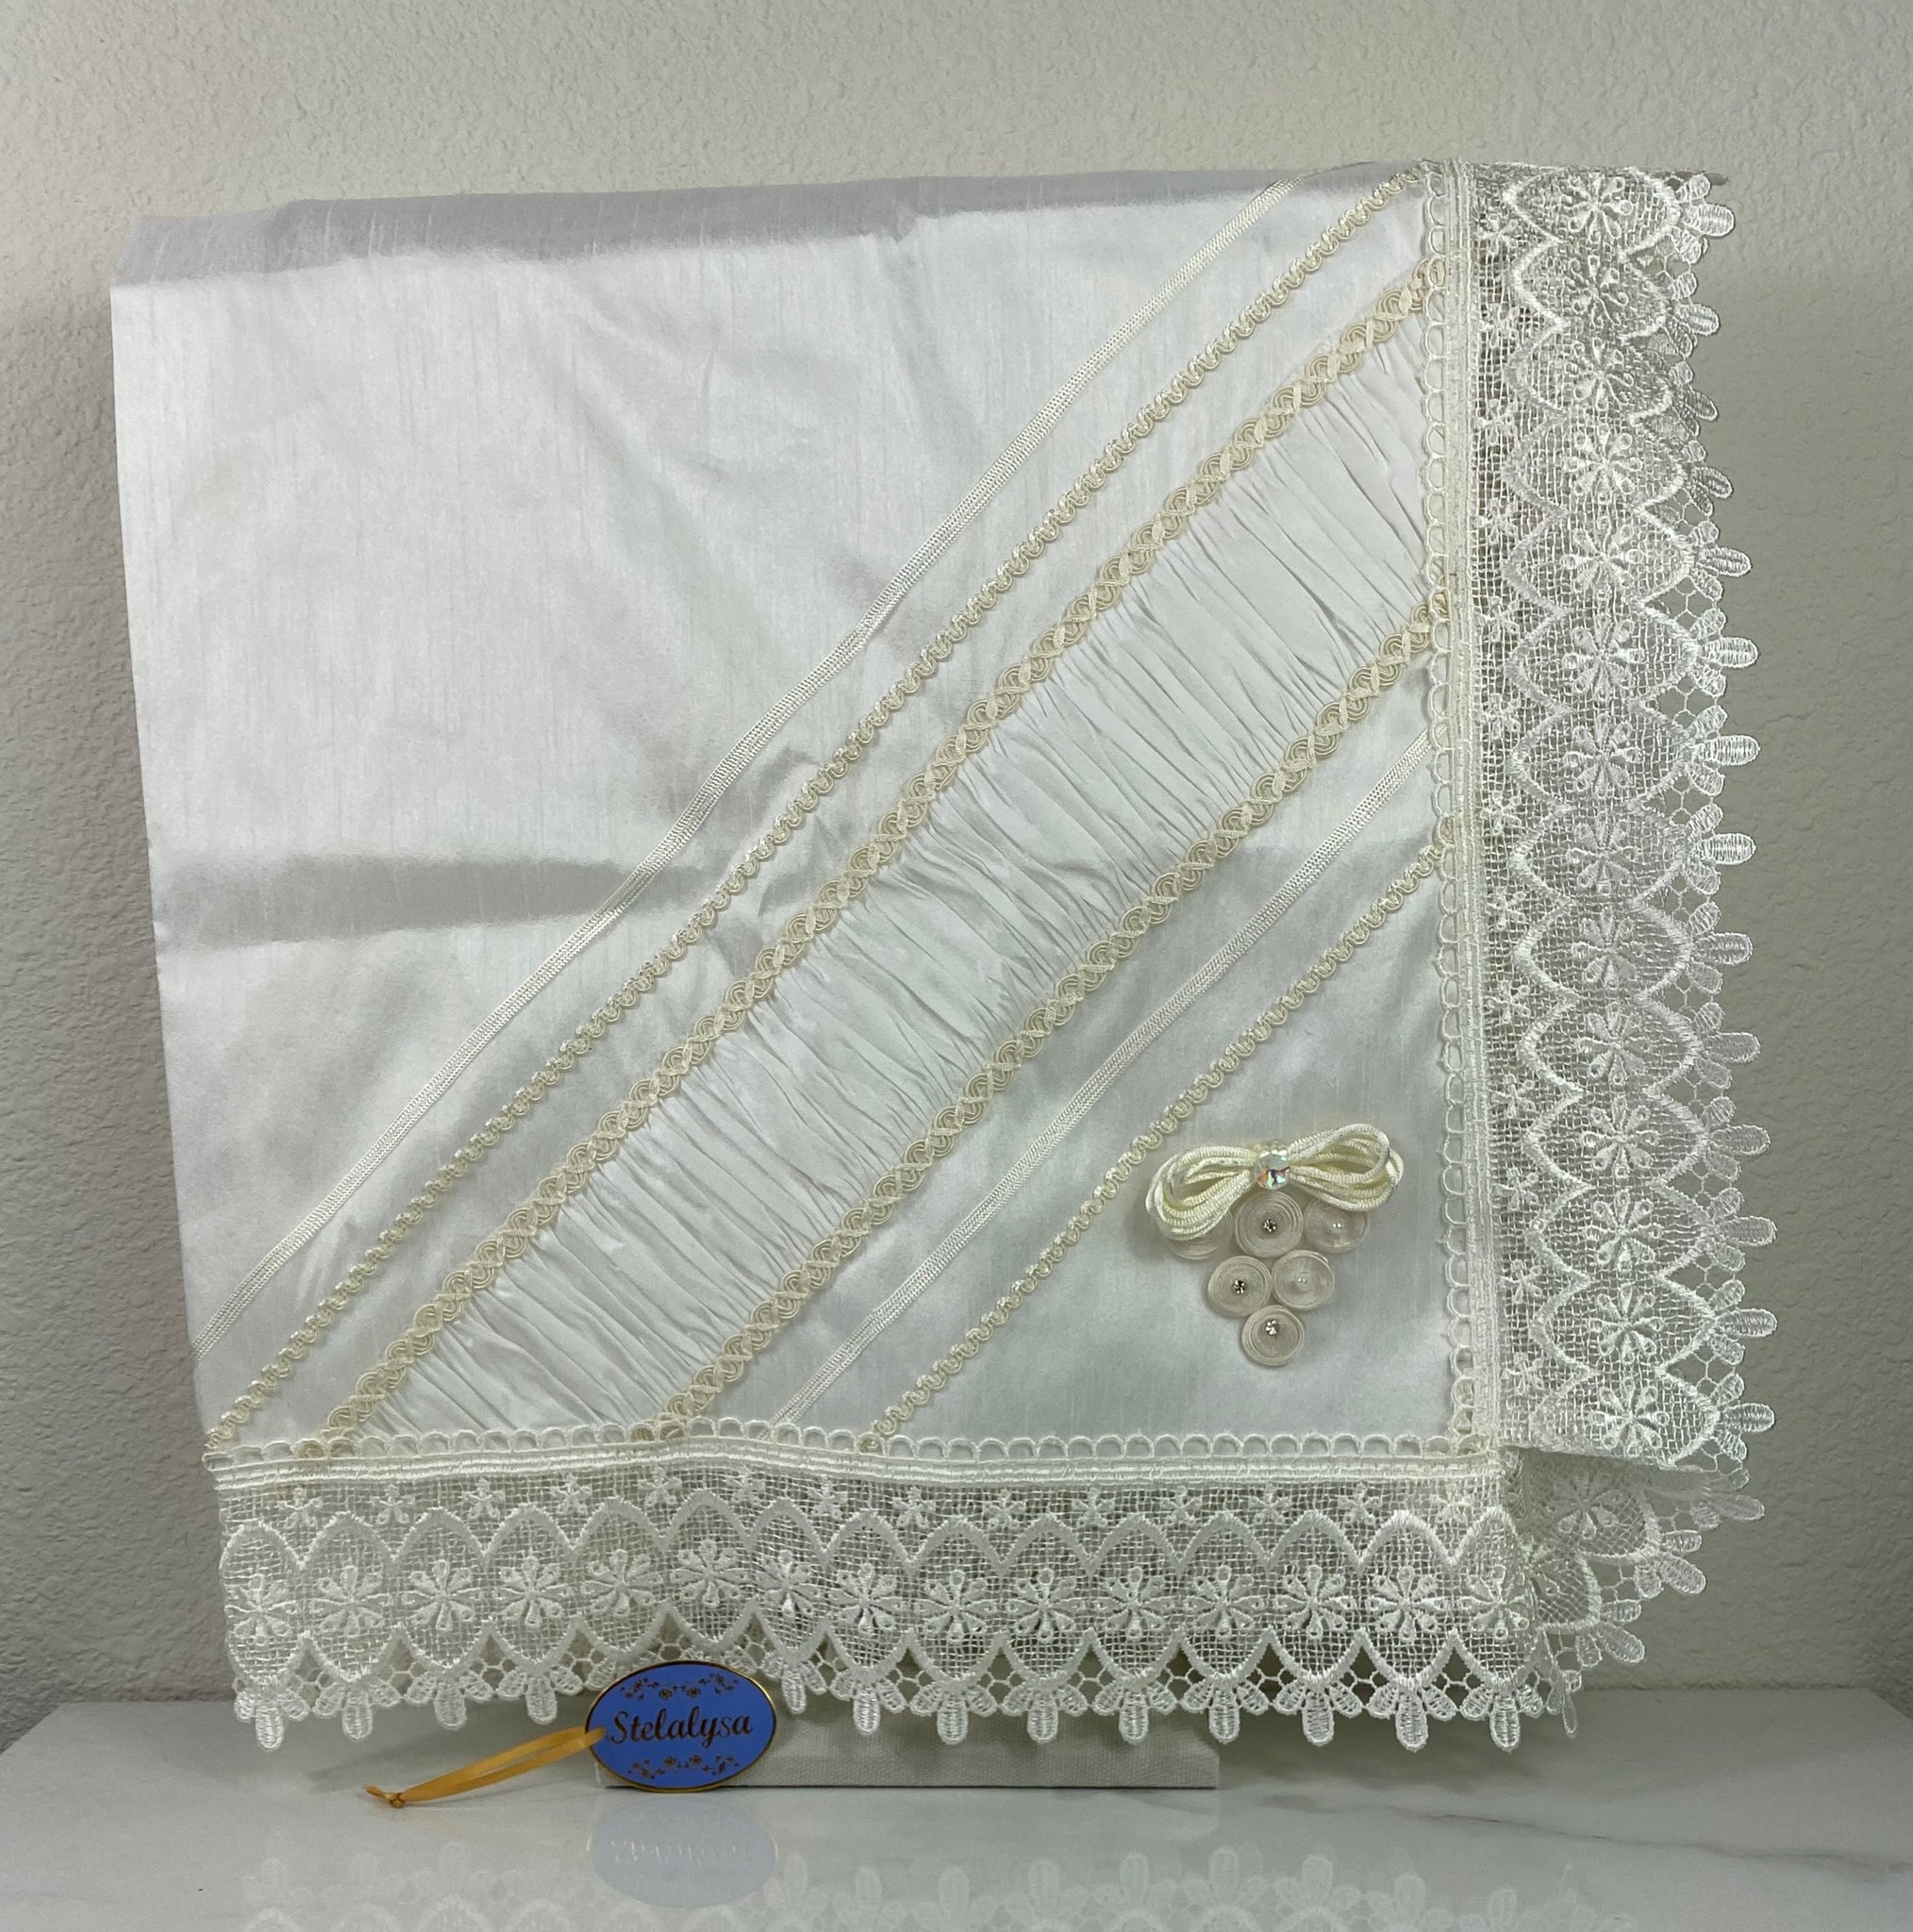 Beautiful embroidered  ivory silk baptism blanket with an bow, cross, elegant lace edge, and jewels.